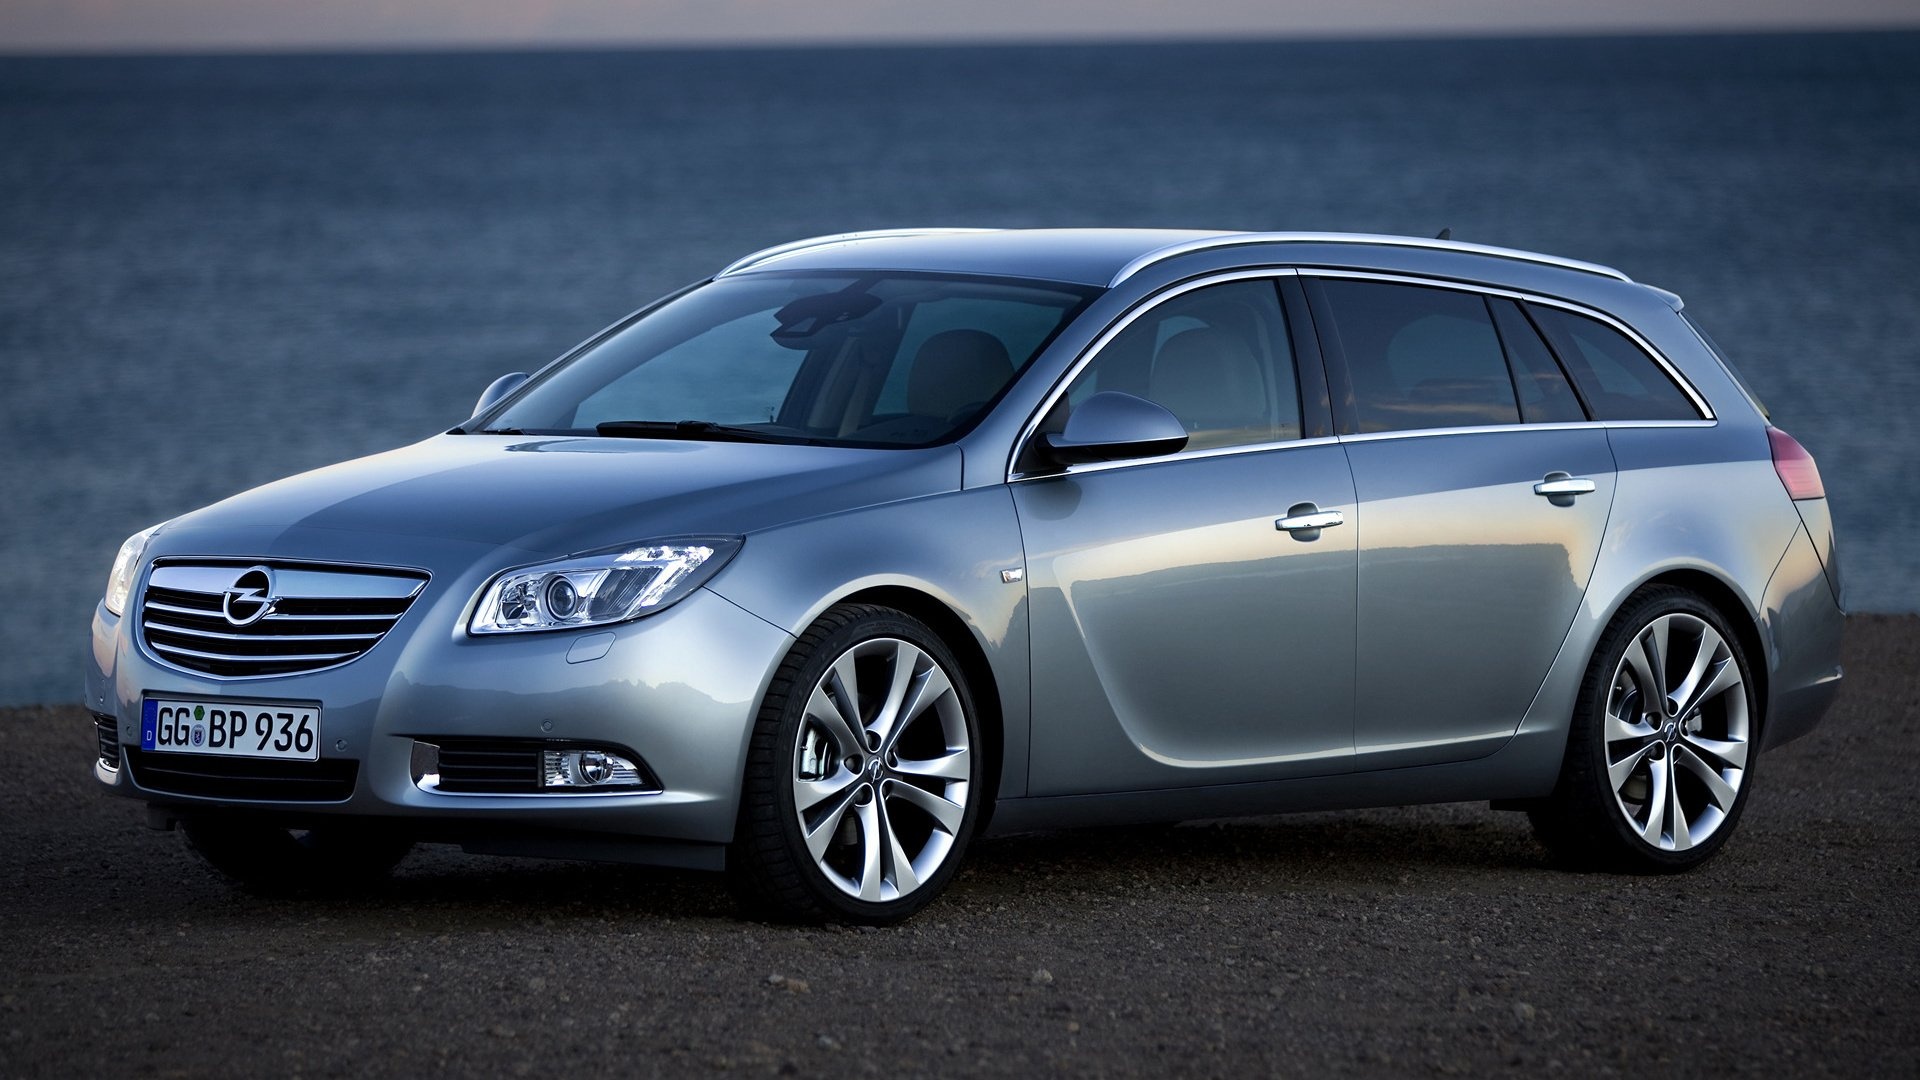 Opel Insignia, Auto enthusiast, Sports tourer edition, HD wallpapers, 1920x1080 Full HD Desktop